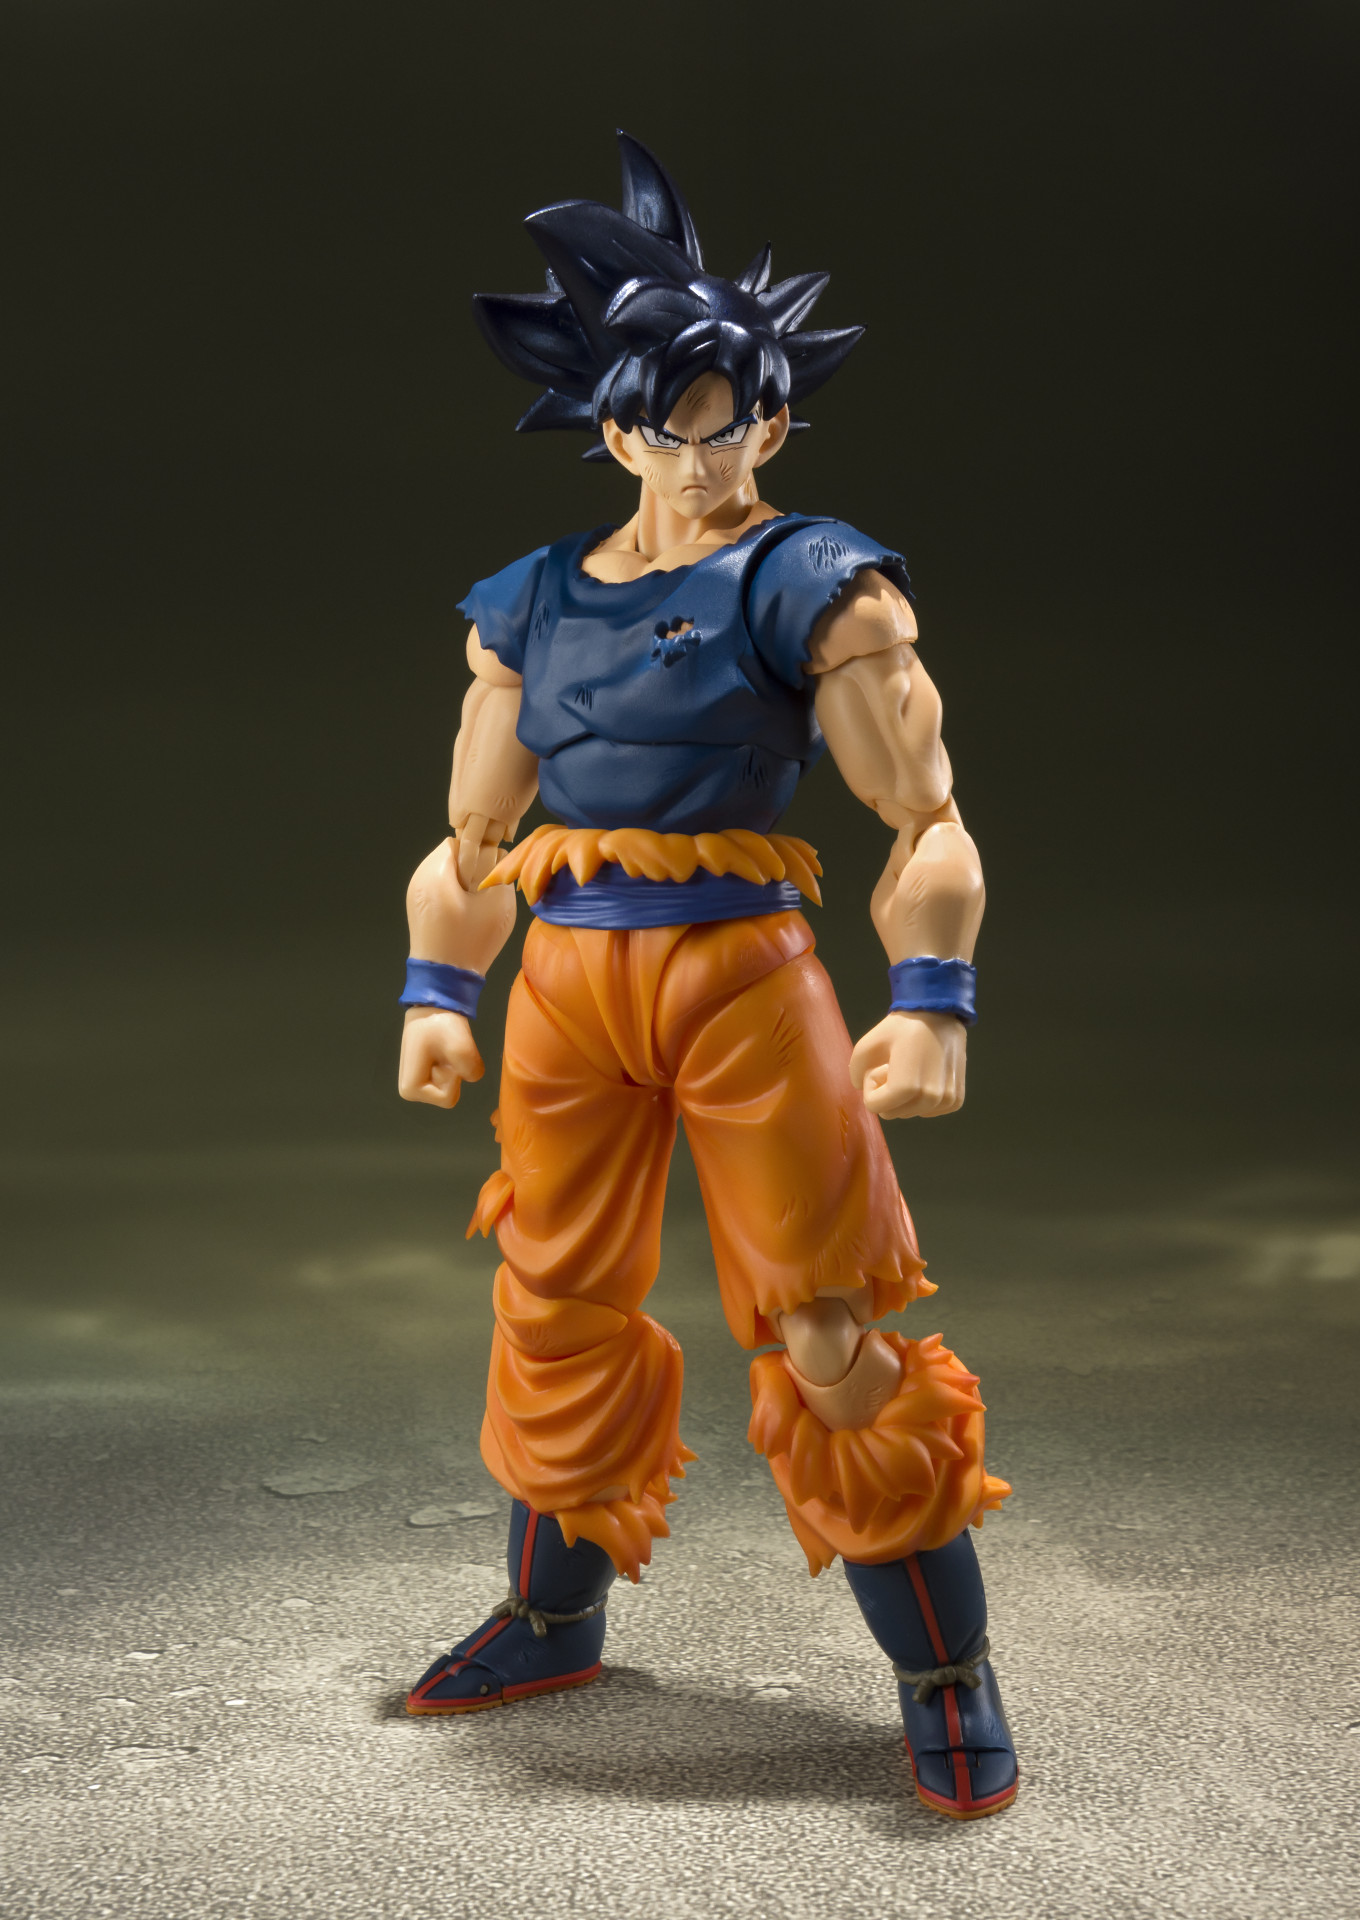 TAMASHII NATIONS Store Undergoes Grand Reopening! Exclusive Goku Figures to Hit the Shelves!